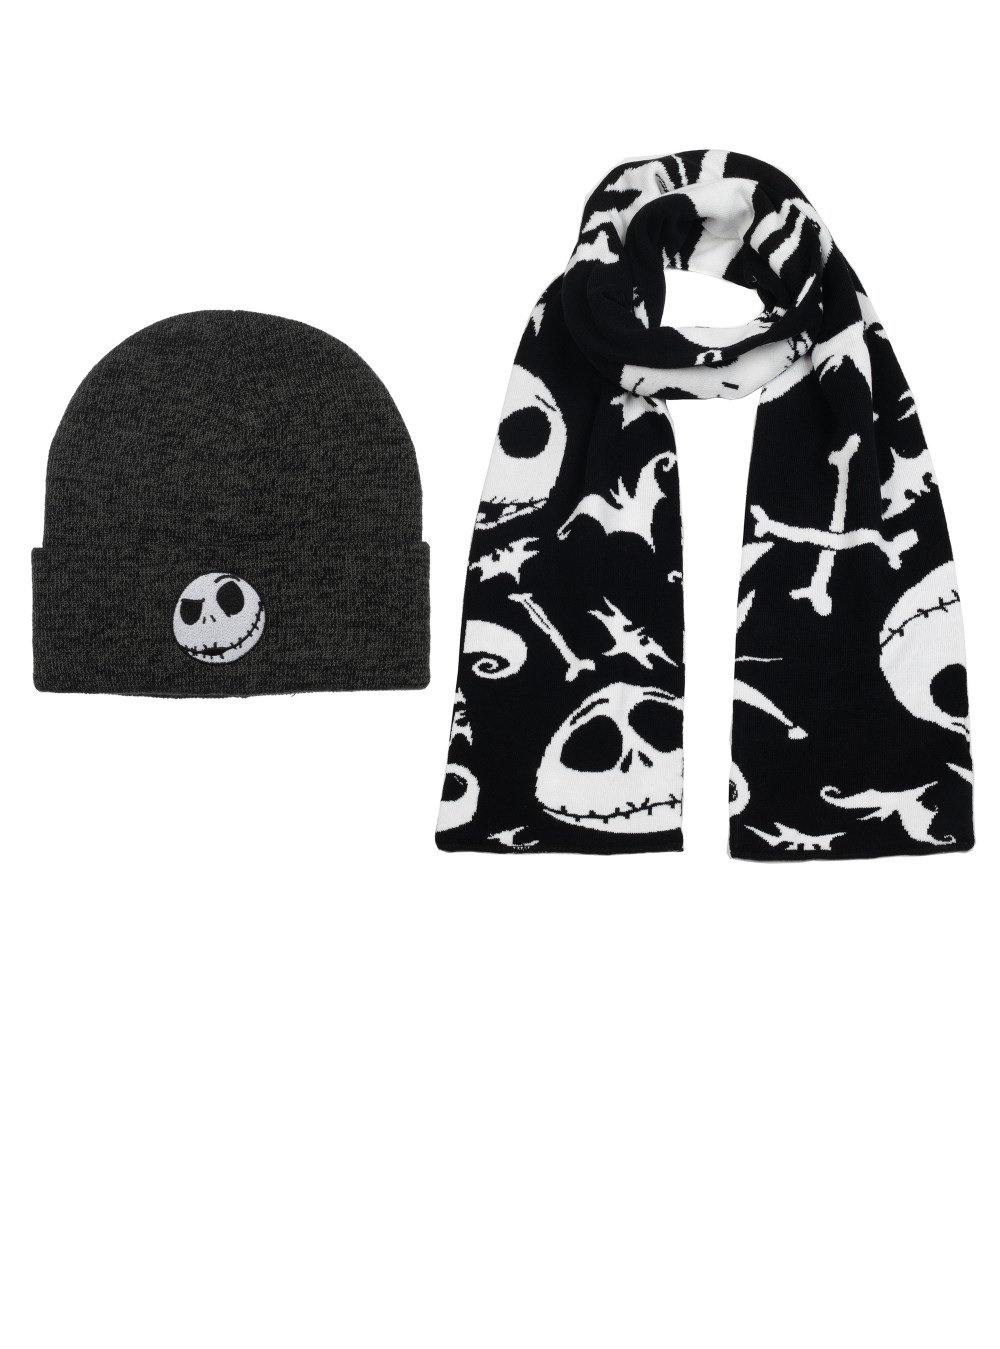 The Nightmare Before Christmas Jack Skellington Winter Hat and Scarf Fan Combo